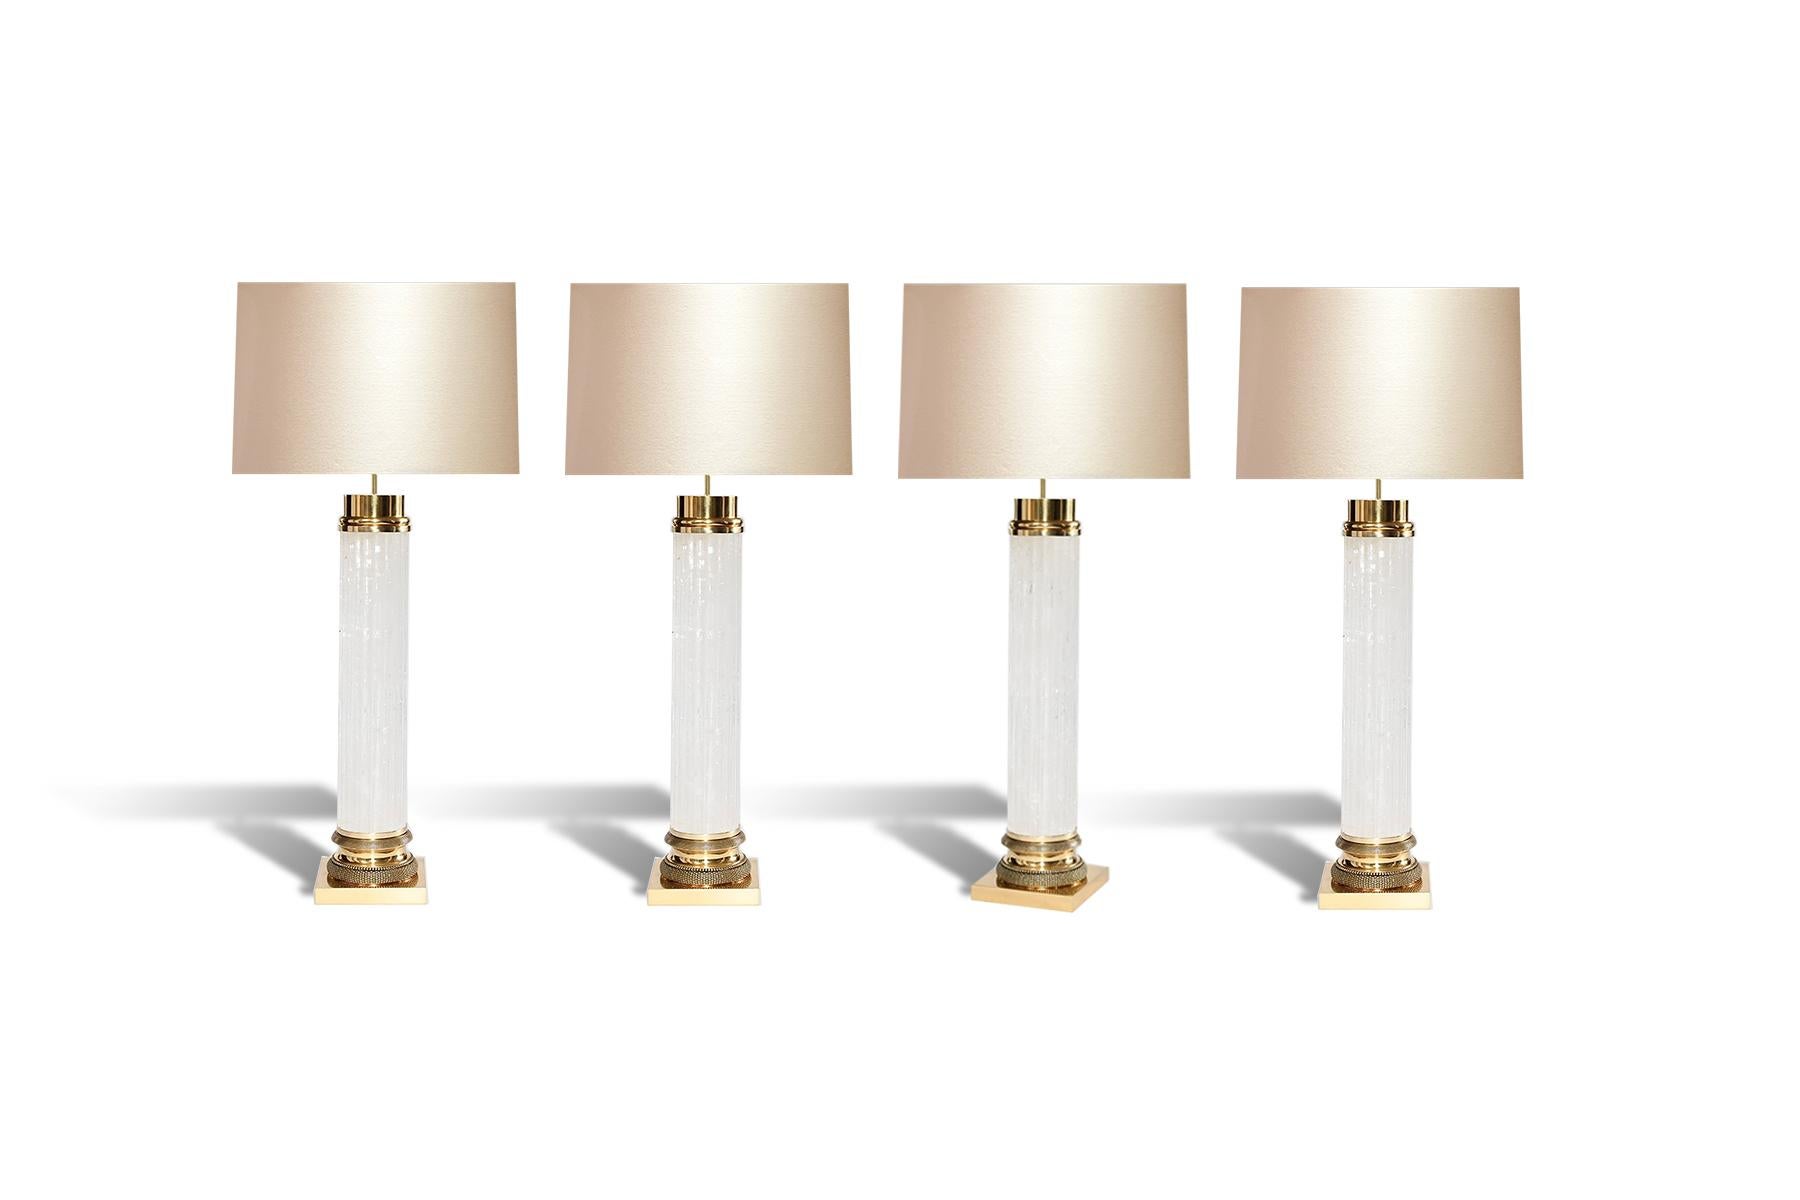 Contemporary Group of Four Column-Form Rock Crystal Lamps by Phoenix